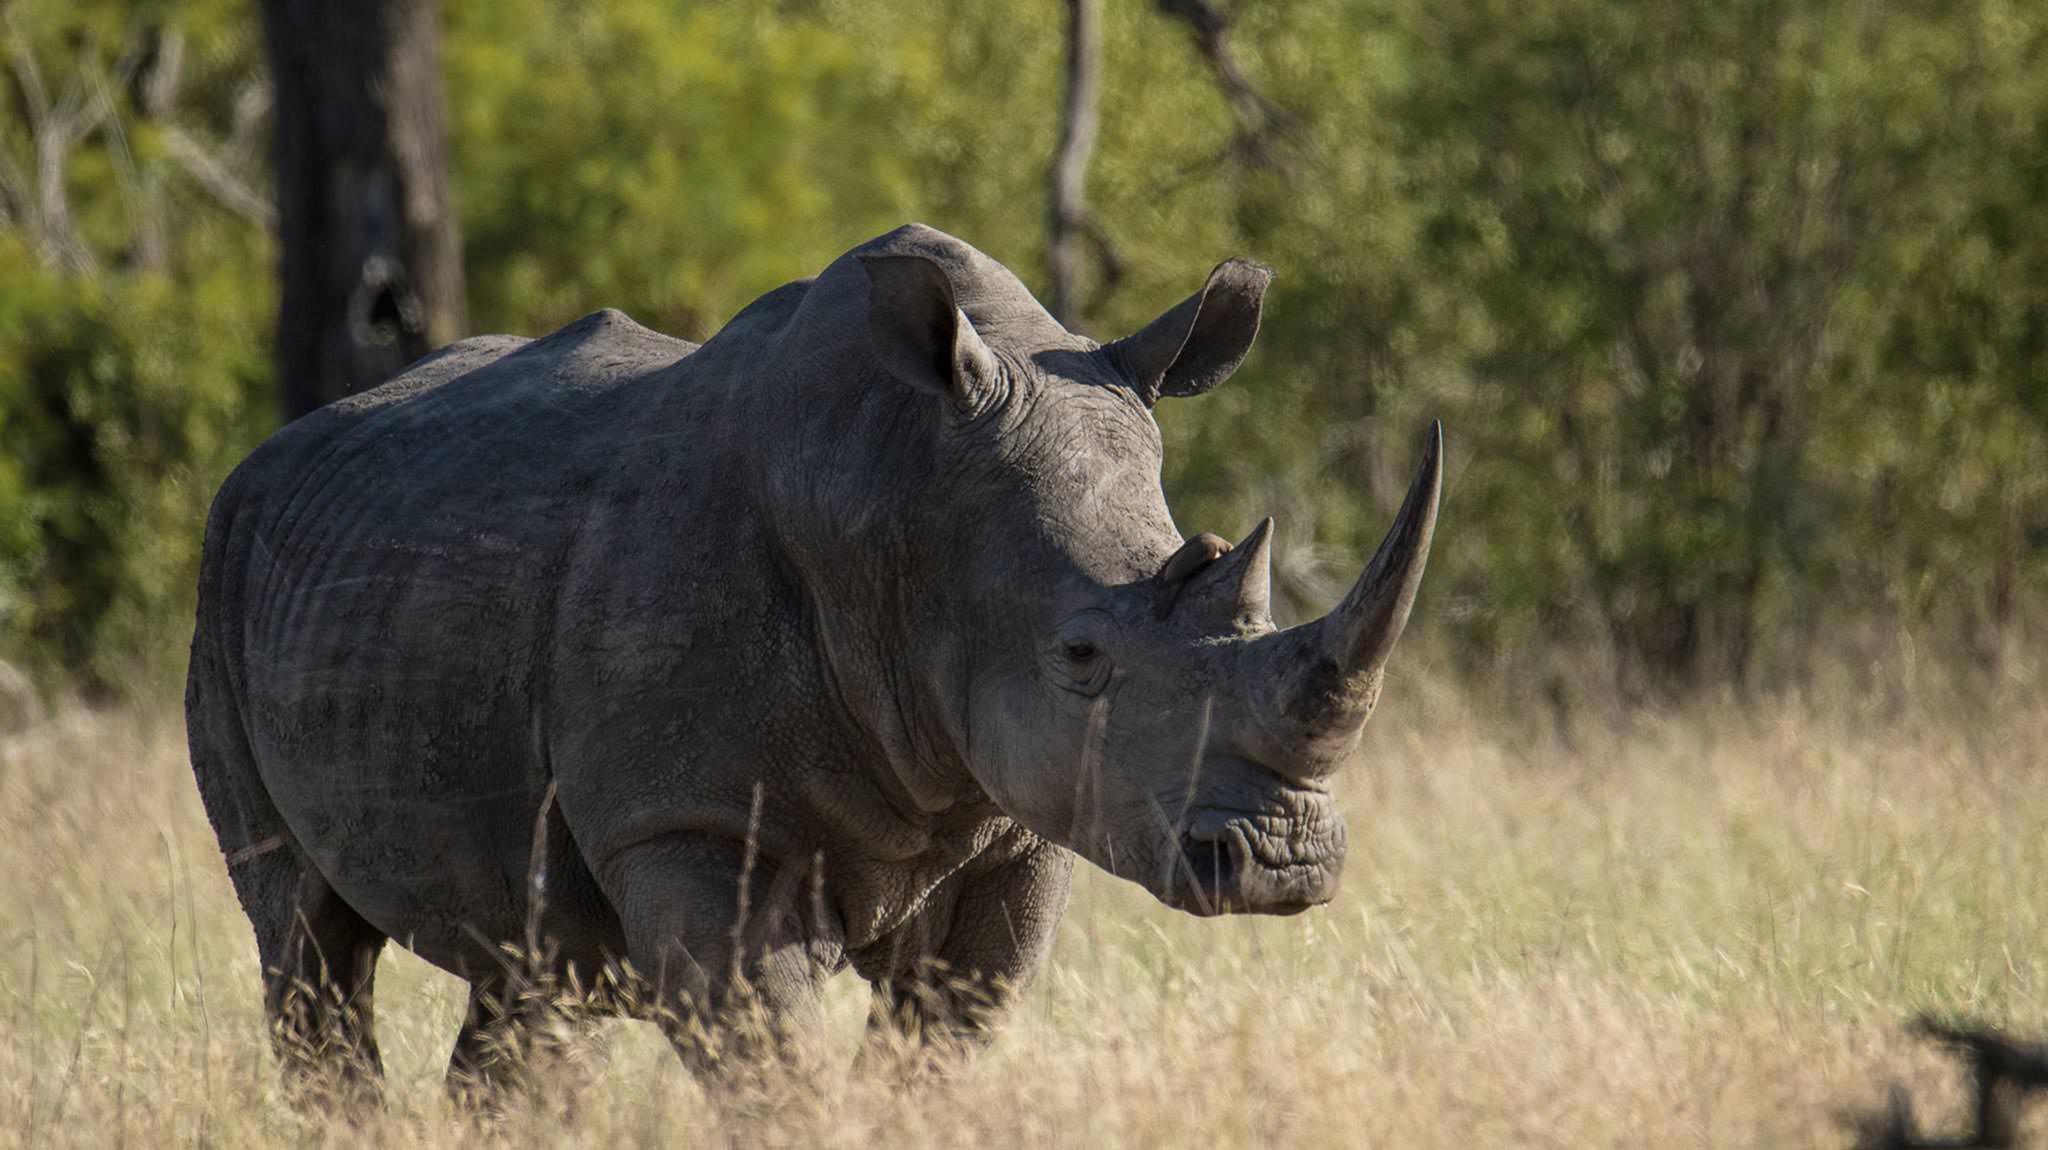 A rhino at Kruger National Park Africa